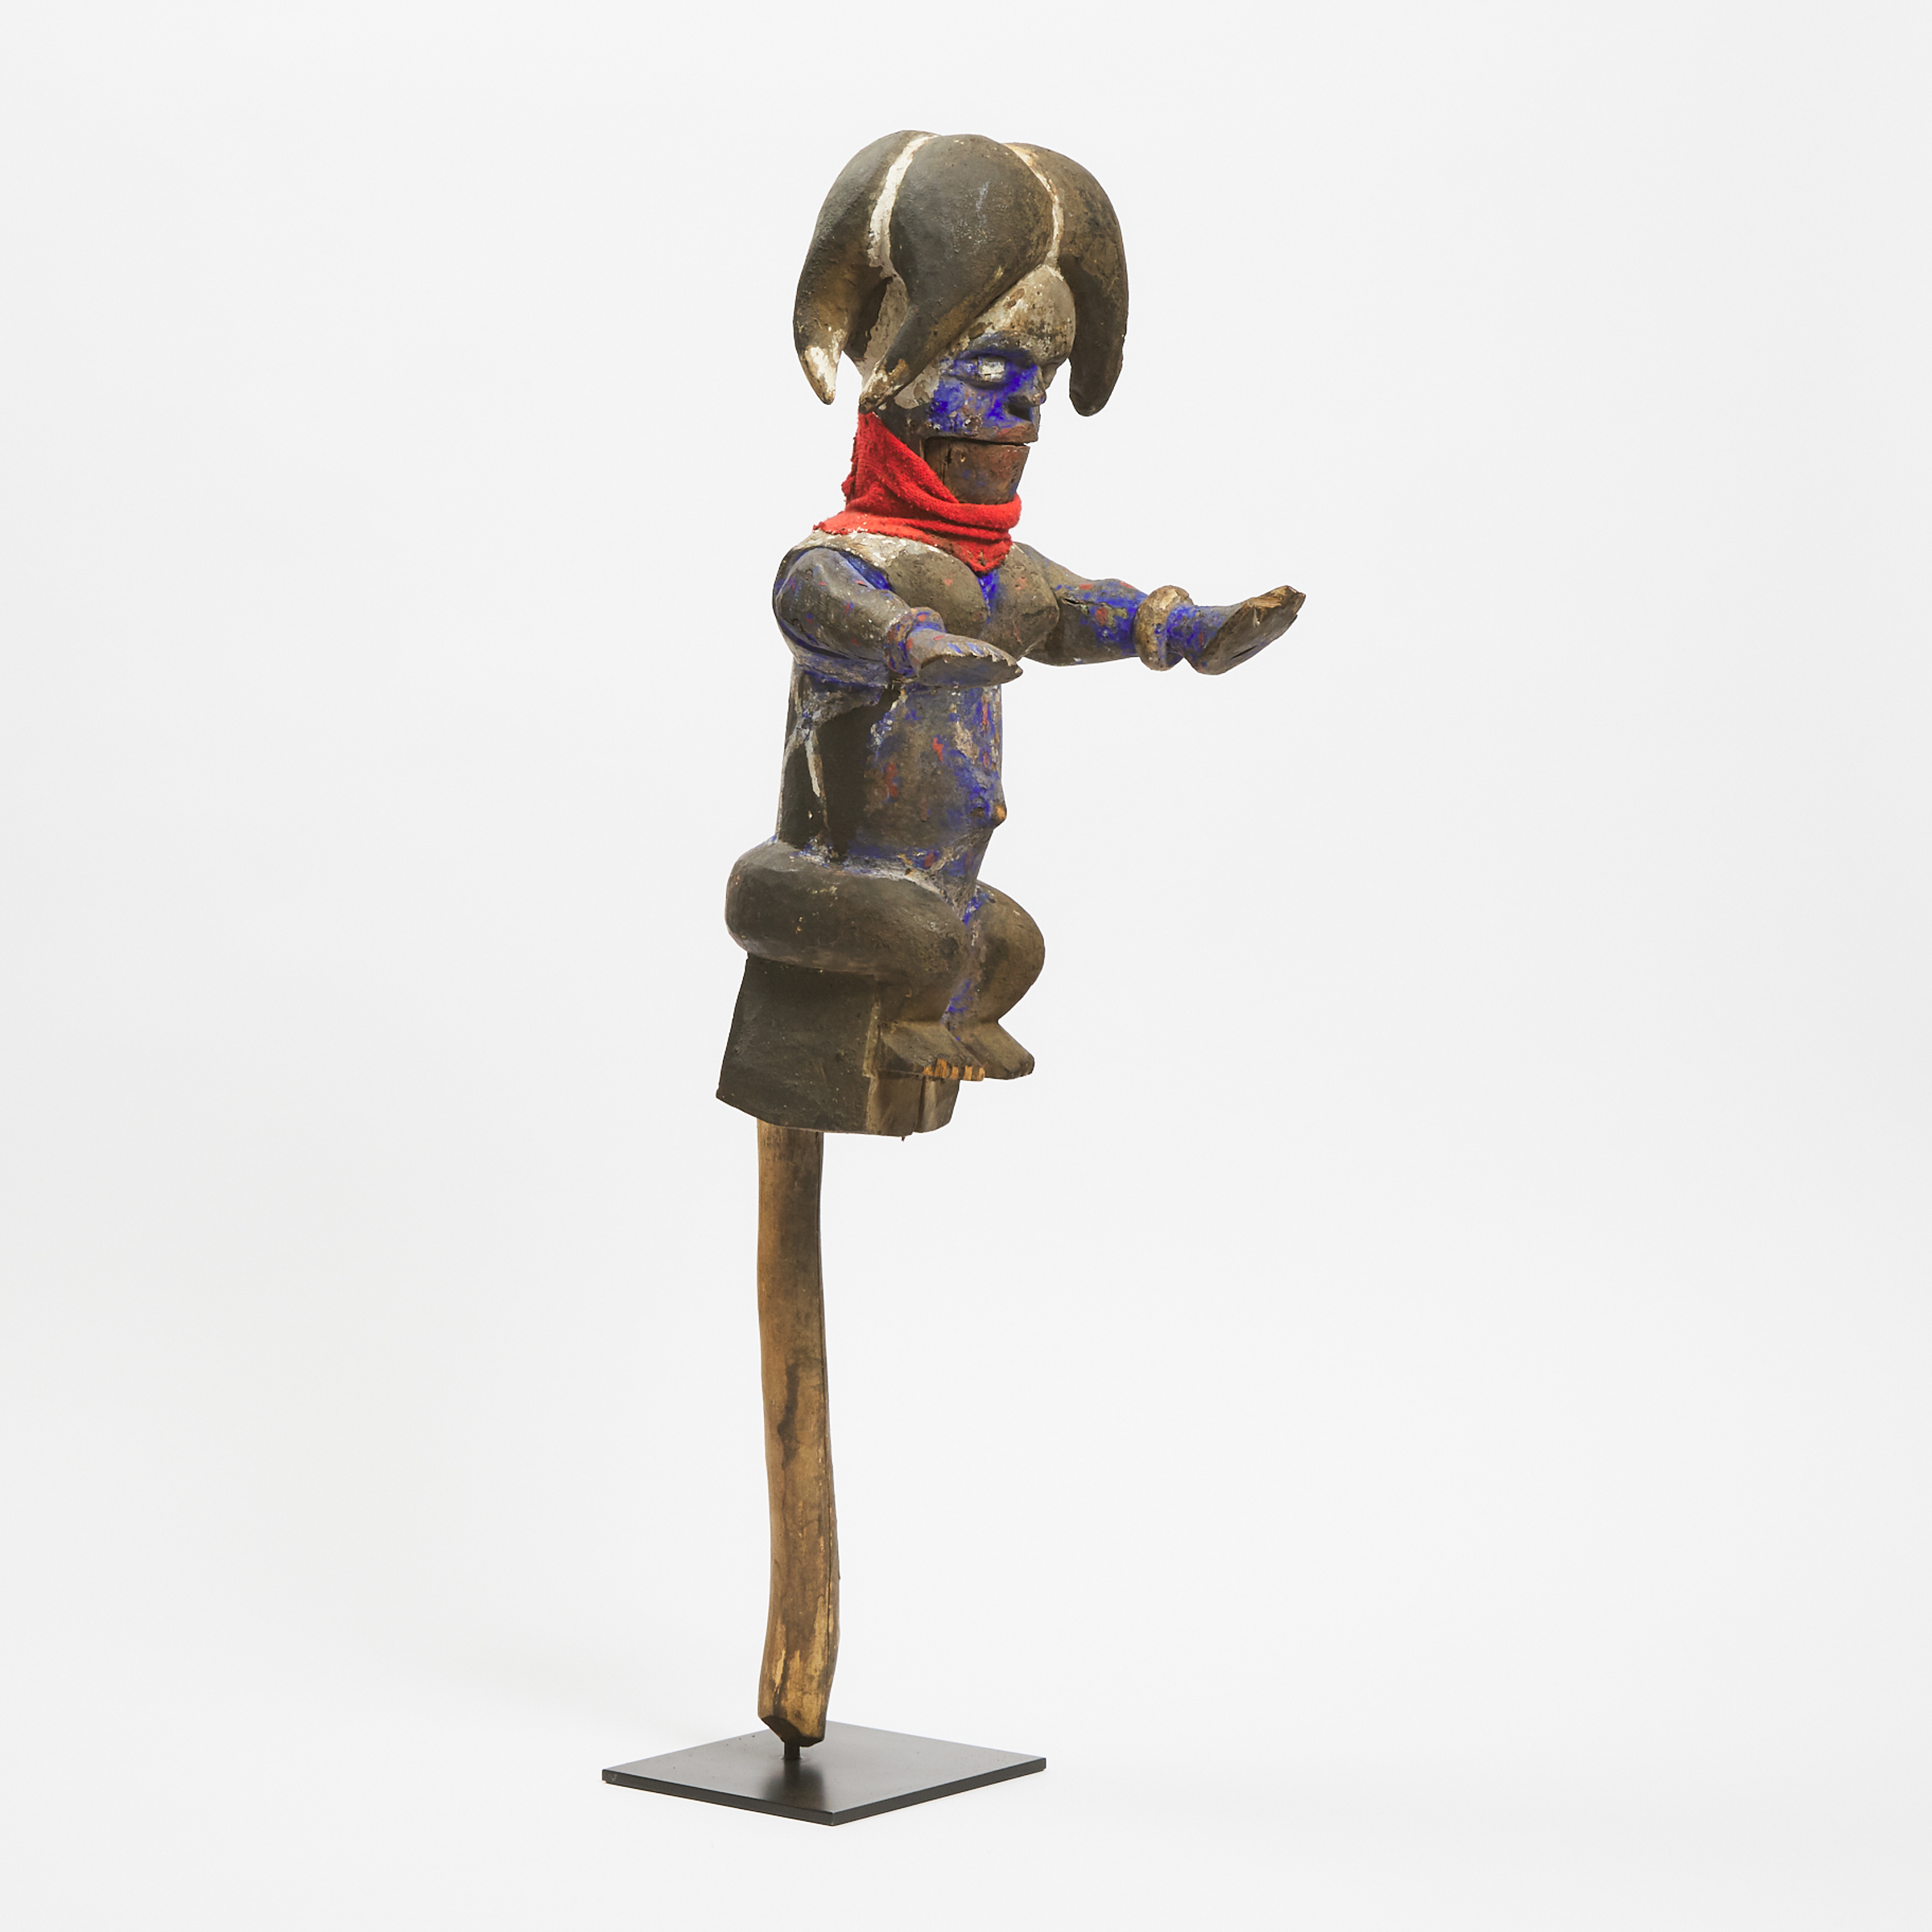 Ibibio Marionette, Nigeria, West Africa, early to mid 20th century